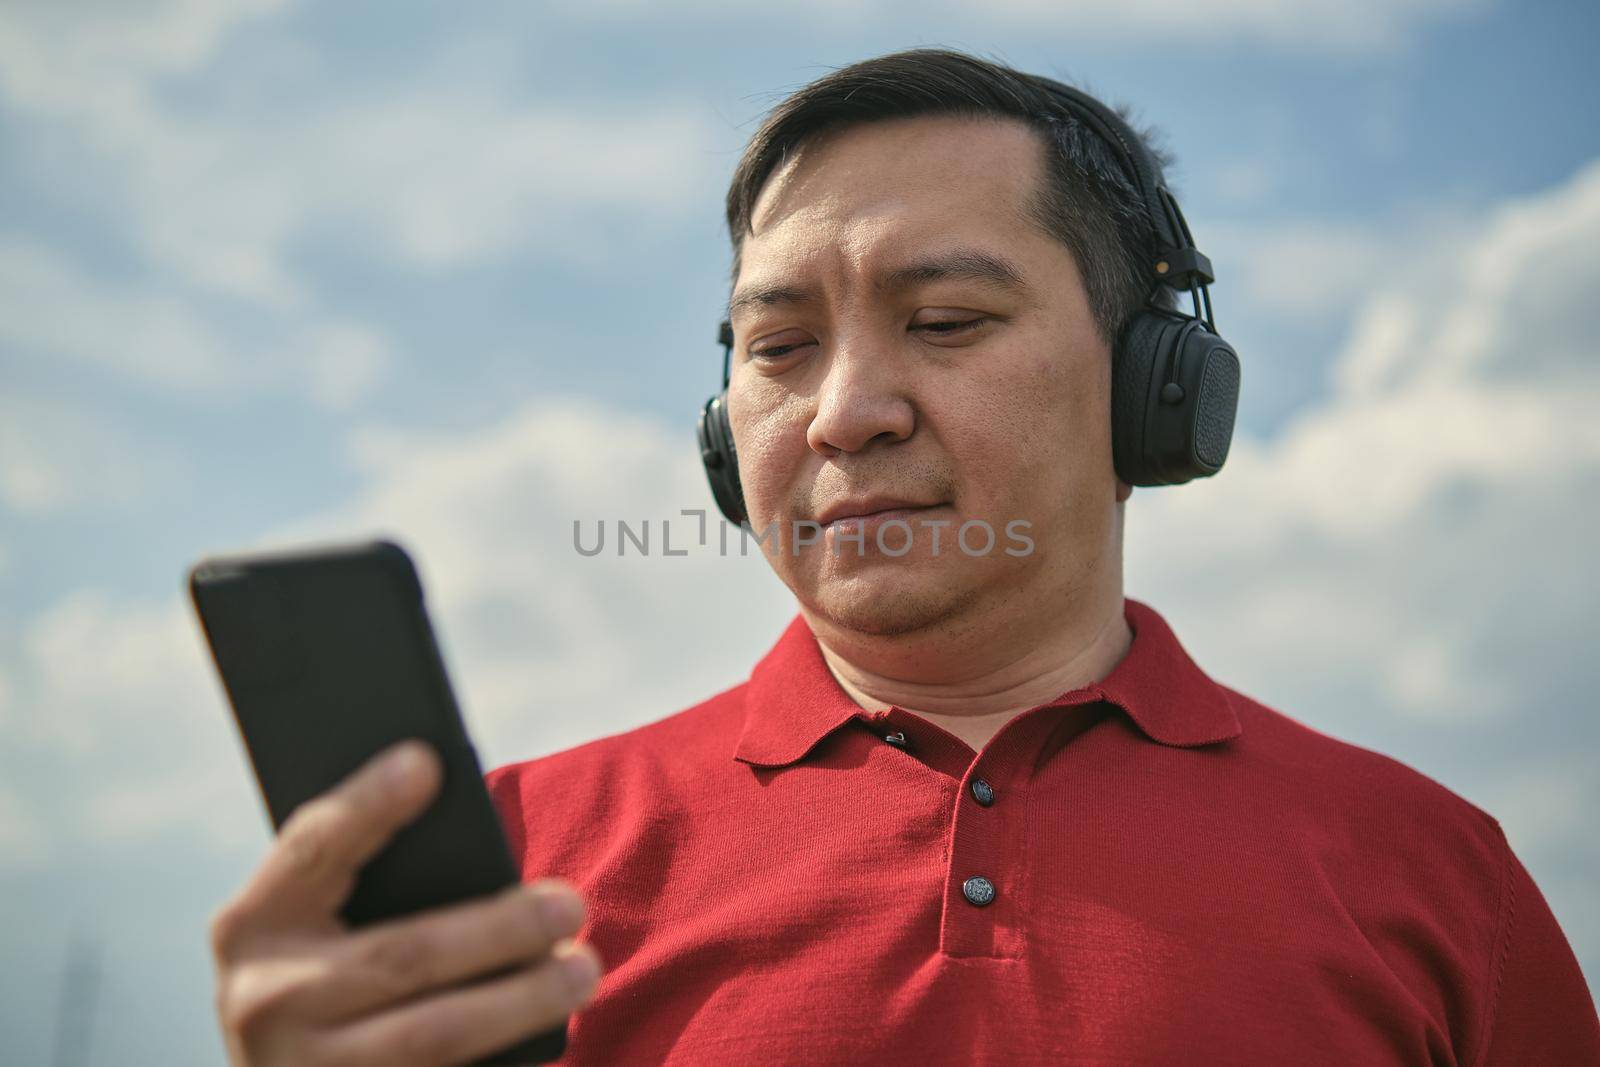 Middle aged man listening to music by his phone, close up by snep_photo